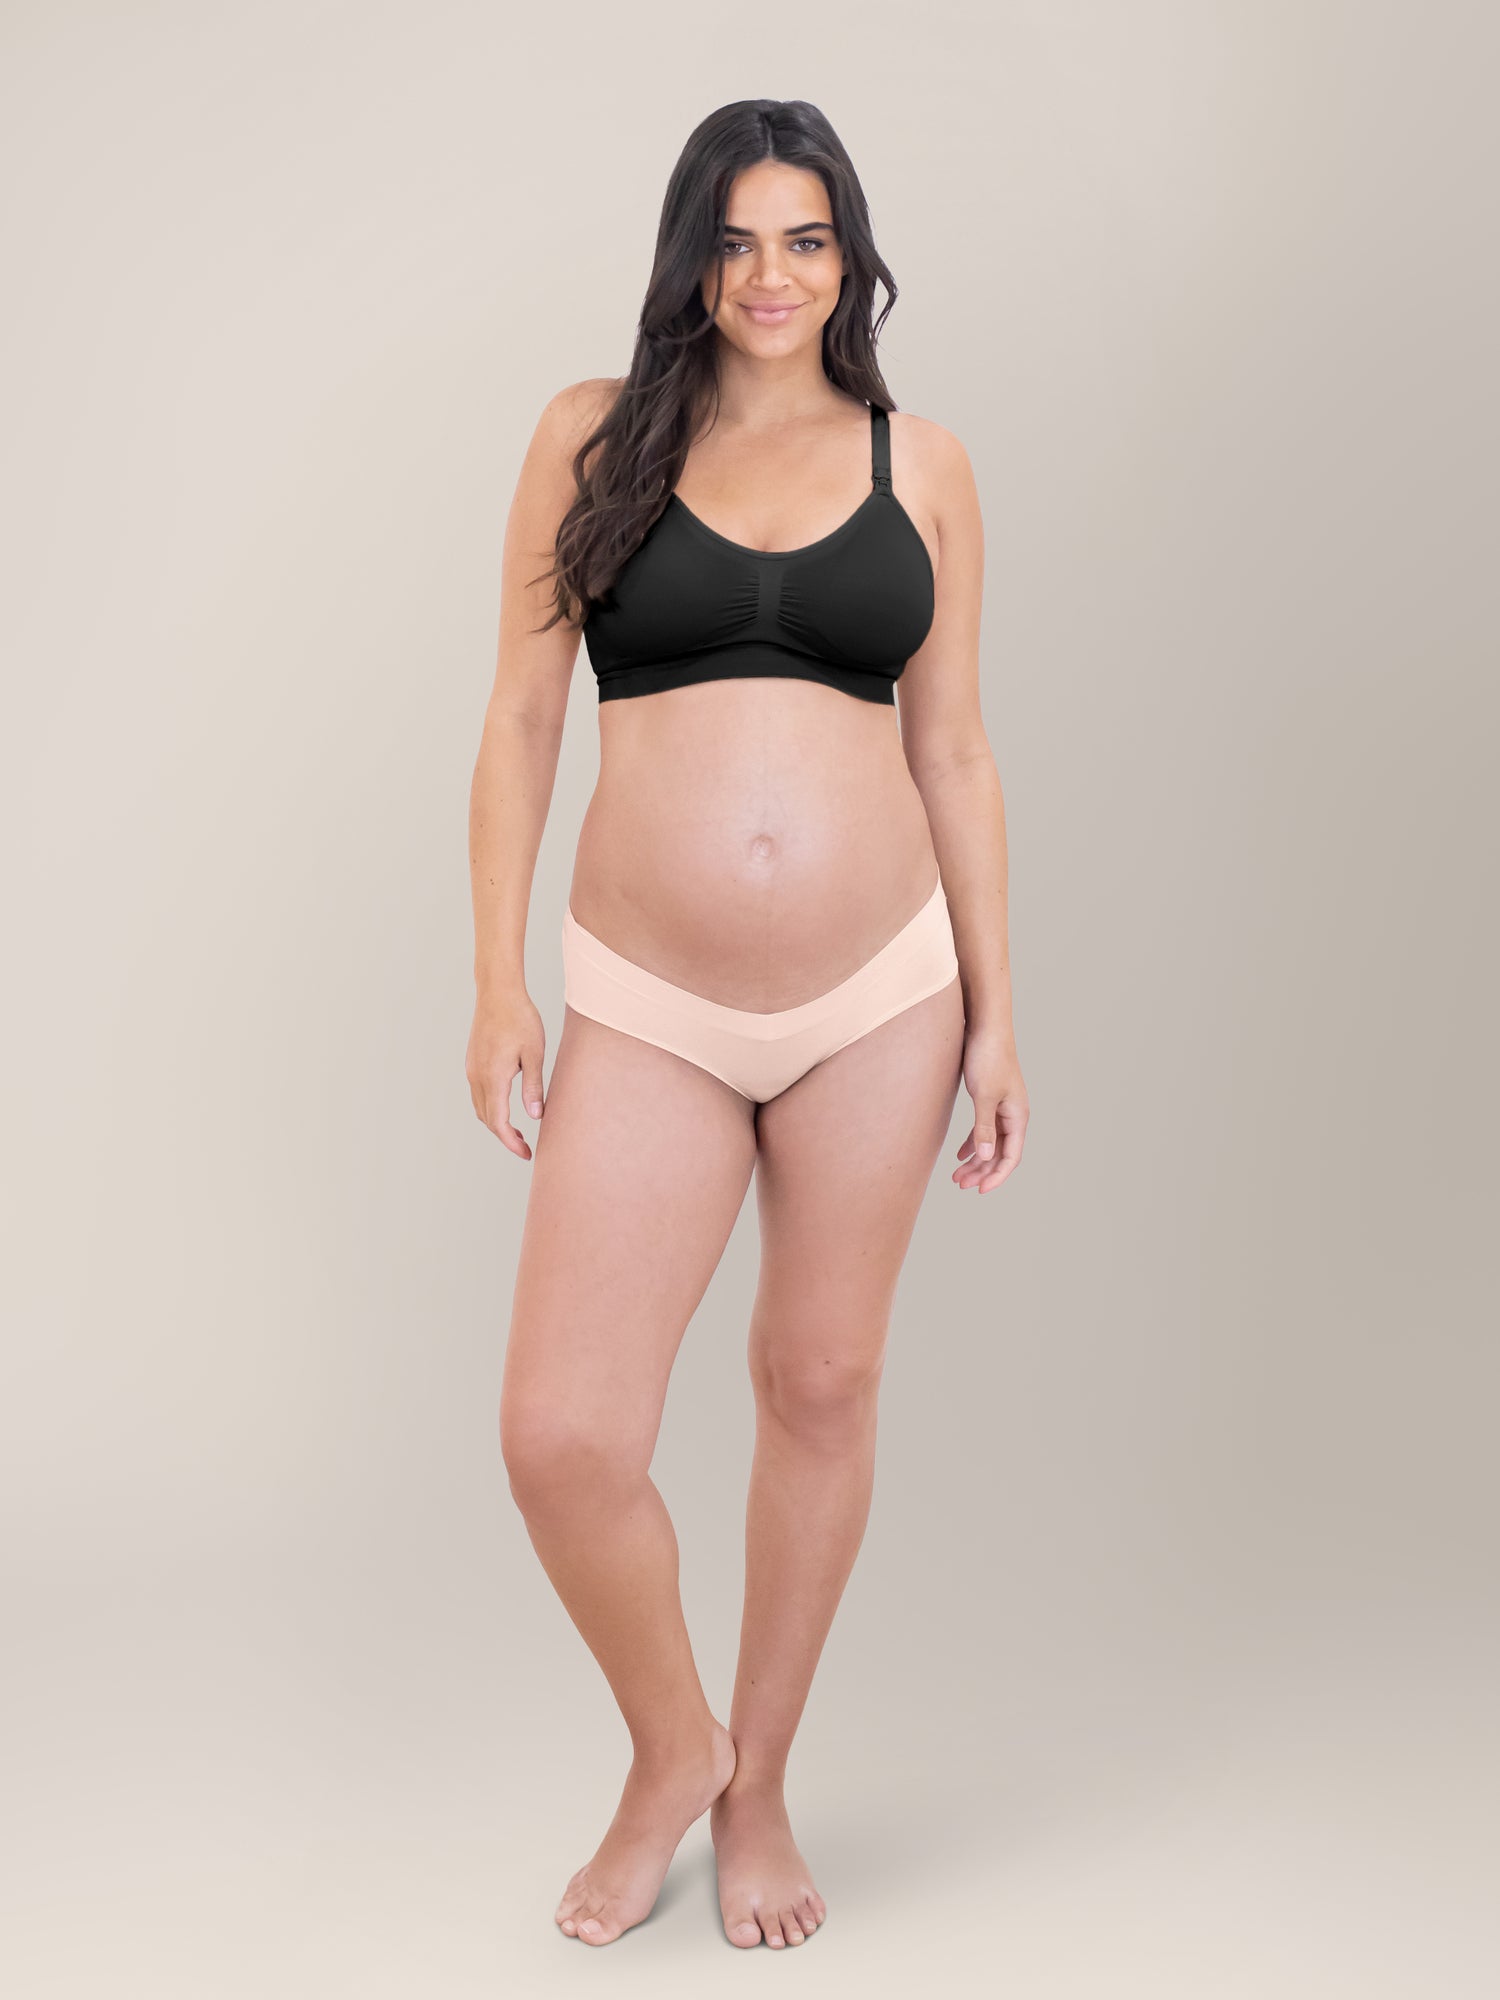 Kindred Bravely High Waisted Postpartum Recovery Panty 5 Pack Multi Neutral  – Baby & Me Maternity